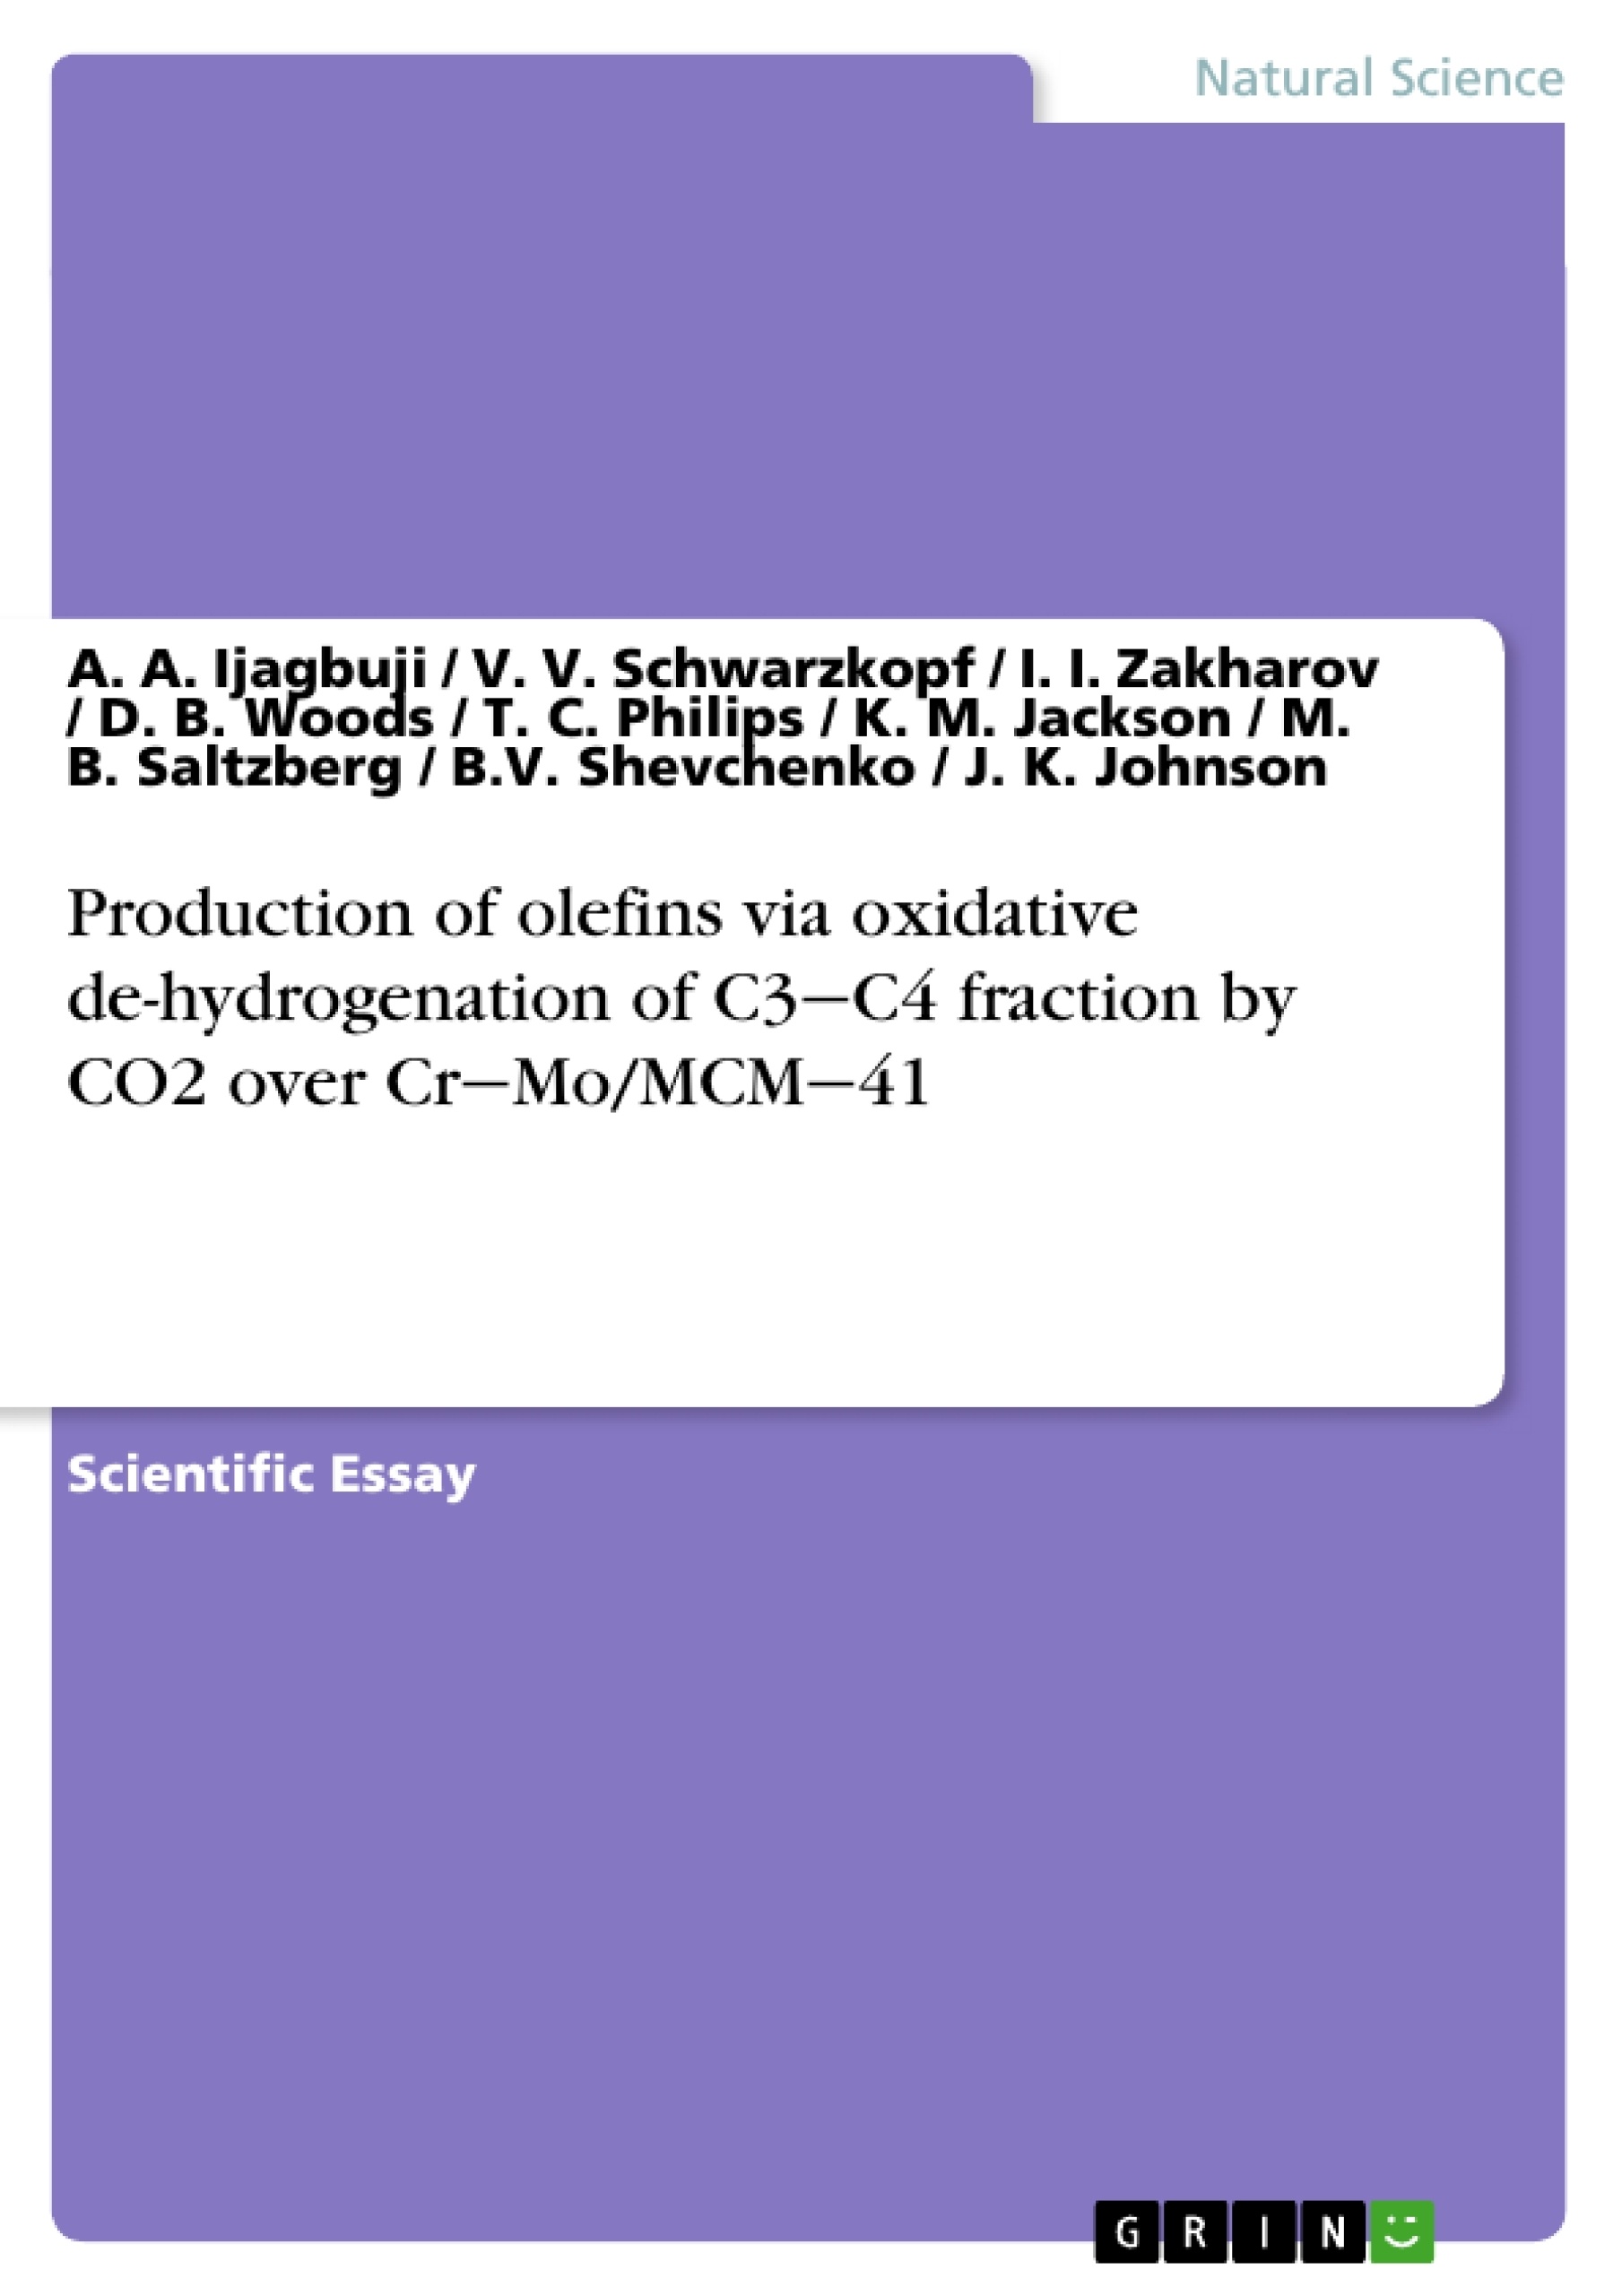 Título: Production of olefins via oxidative de-hydrogenation of C3‒C4 fraction by CO2 over Cr‒Mo/MCM‒41